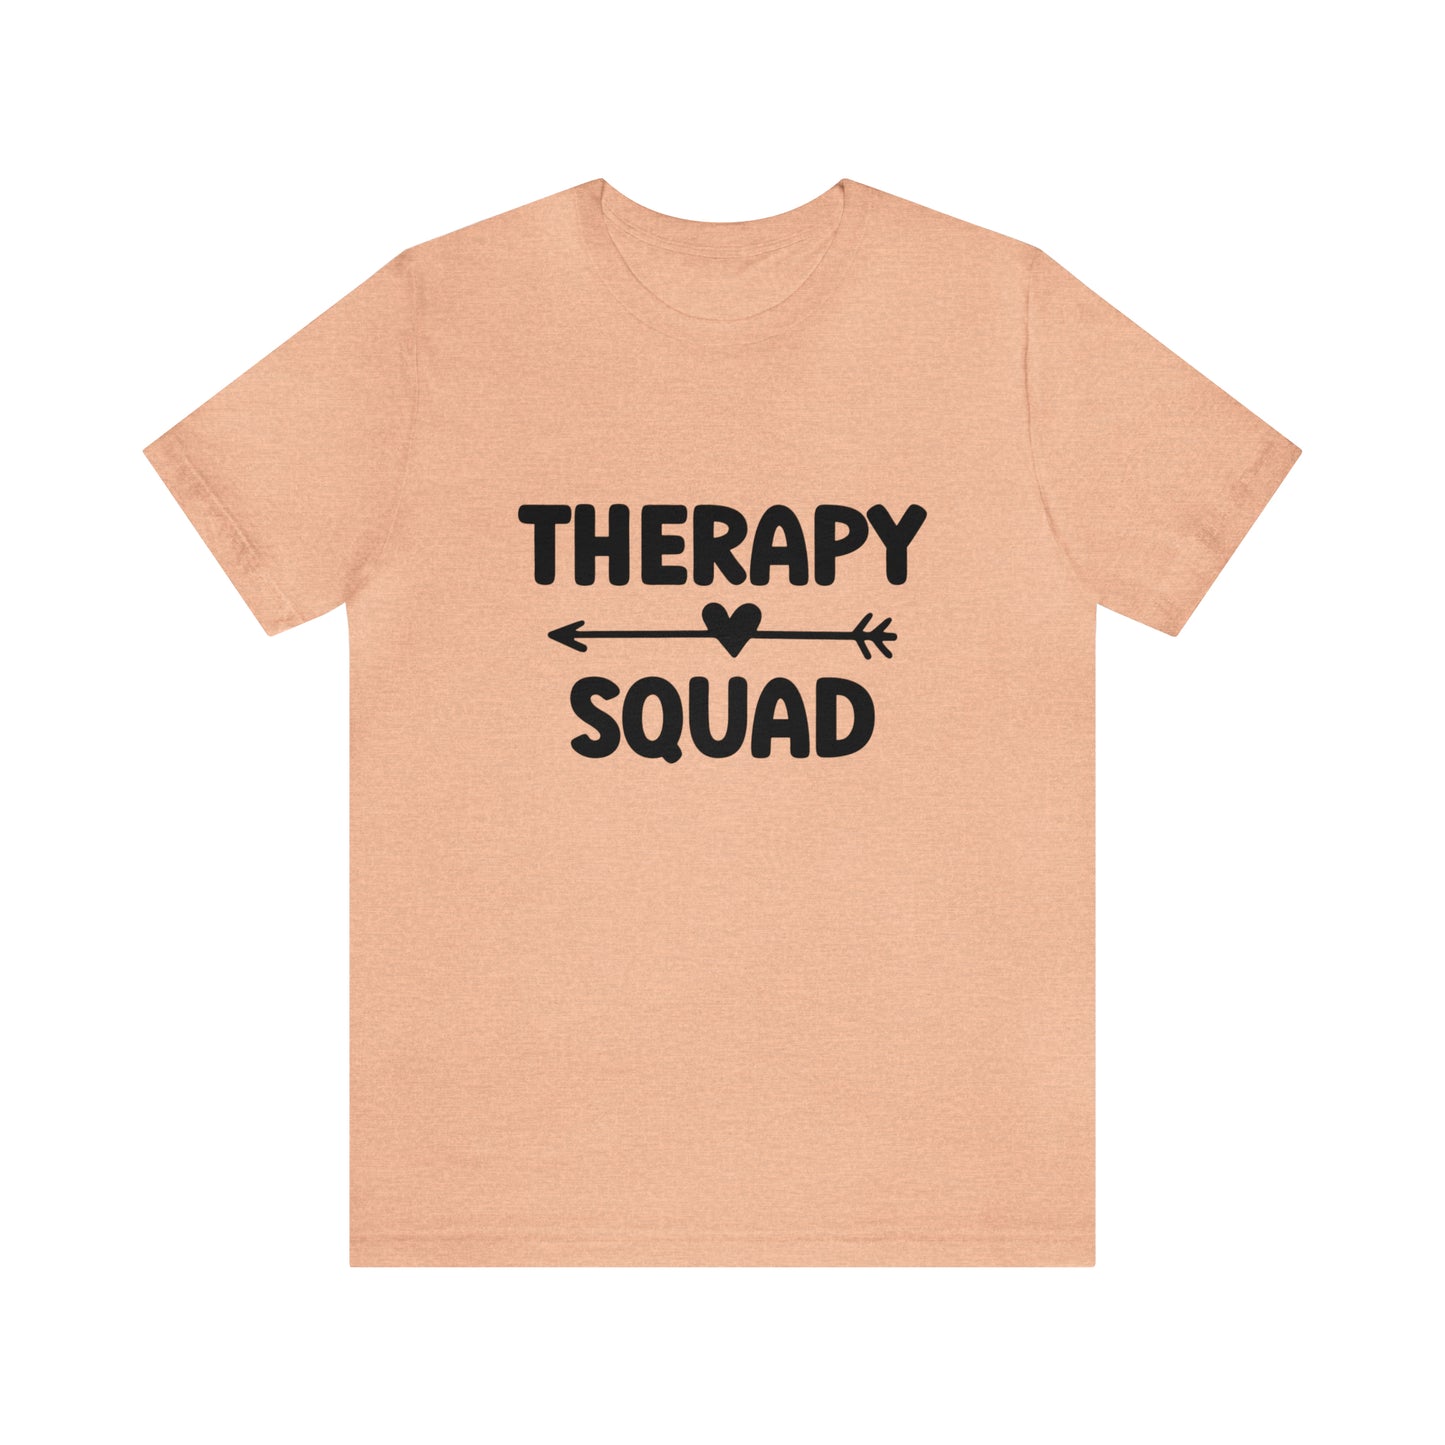 Therapy Squad Short Sleeve Women's Tee